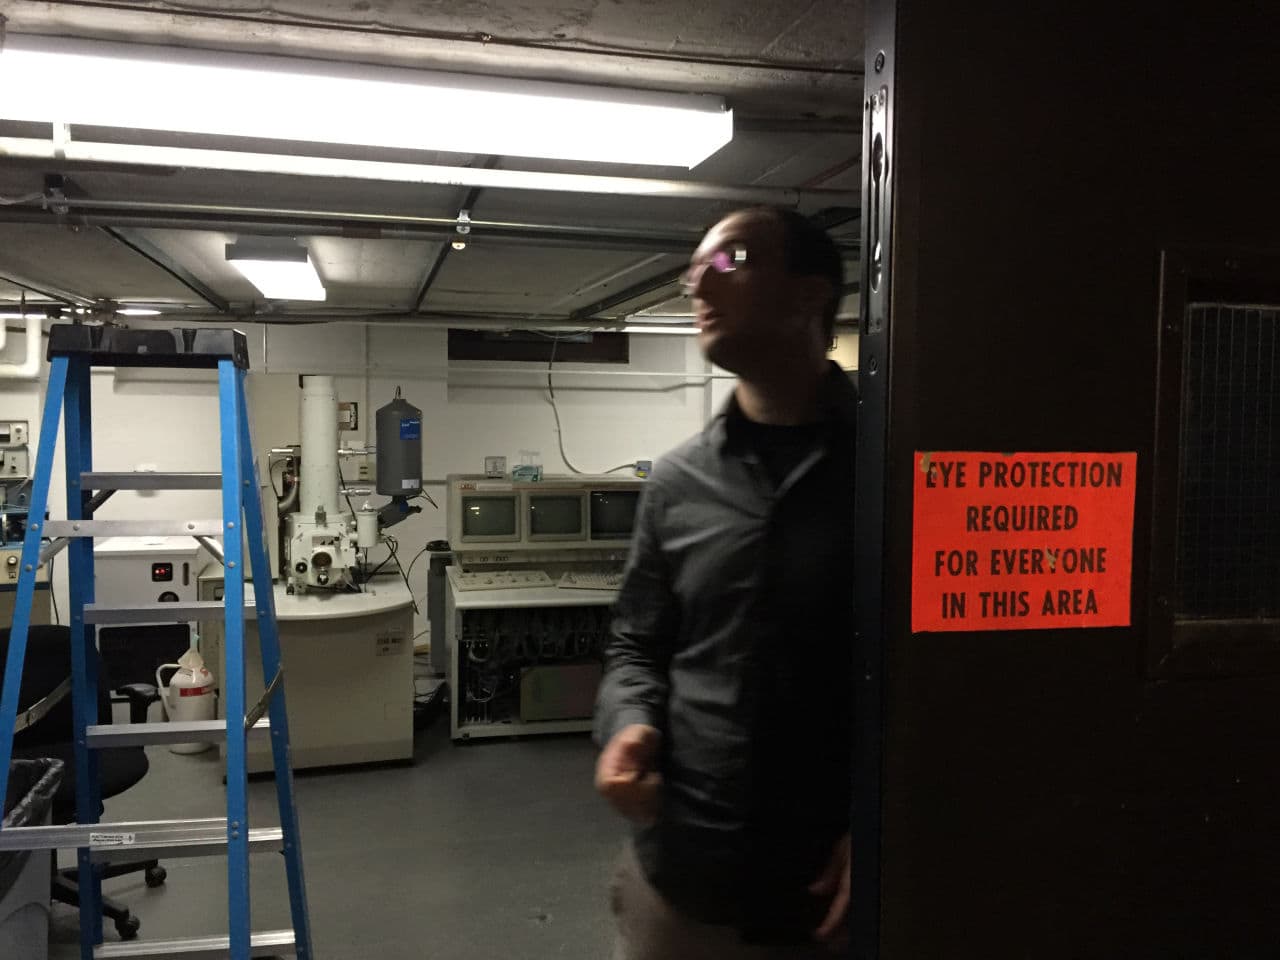 Michael Short, a nuclear engineer at MIT, makes sure to take all safety precautions in the lab. (Ari Daniel)